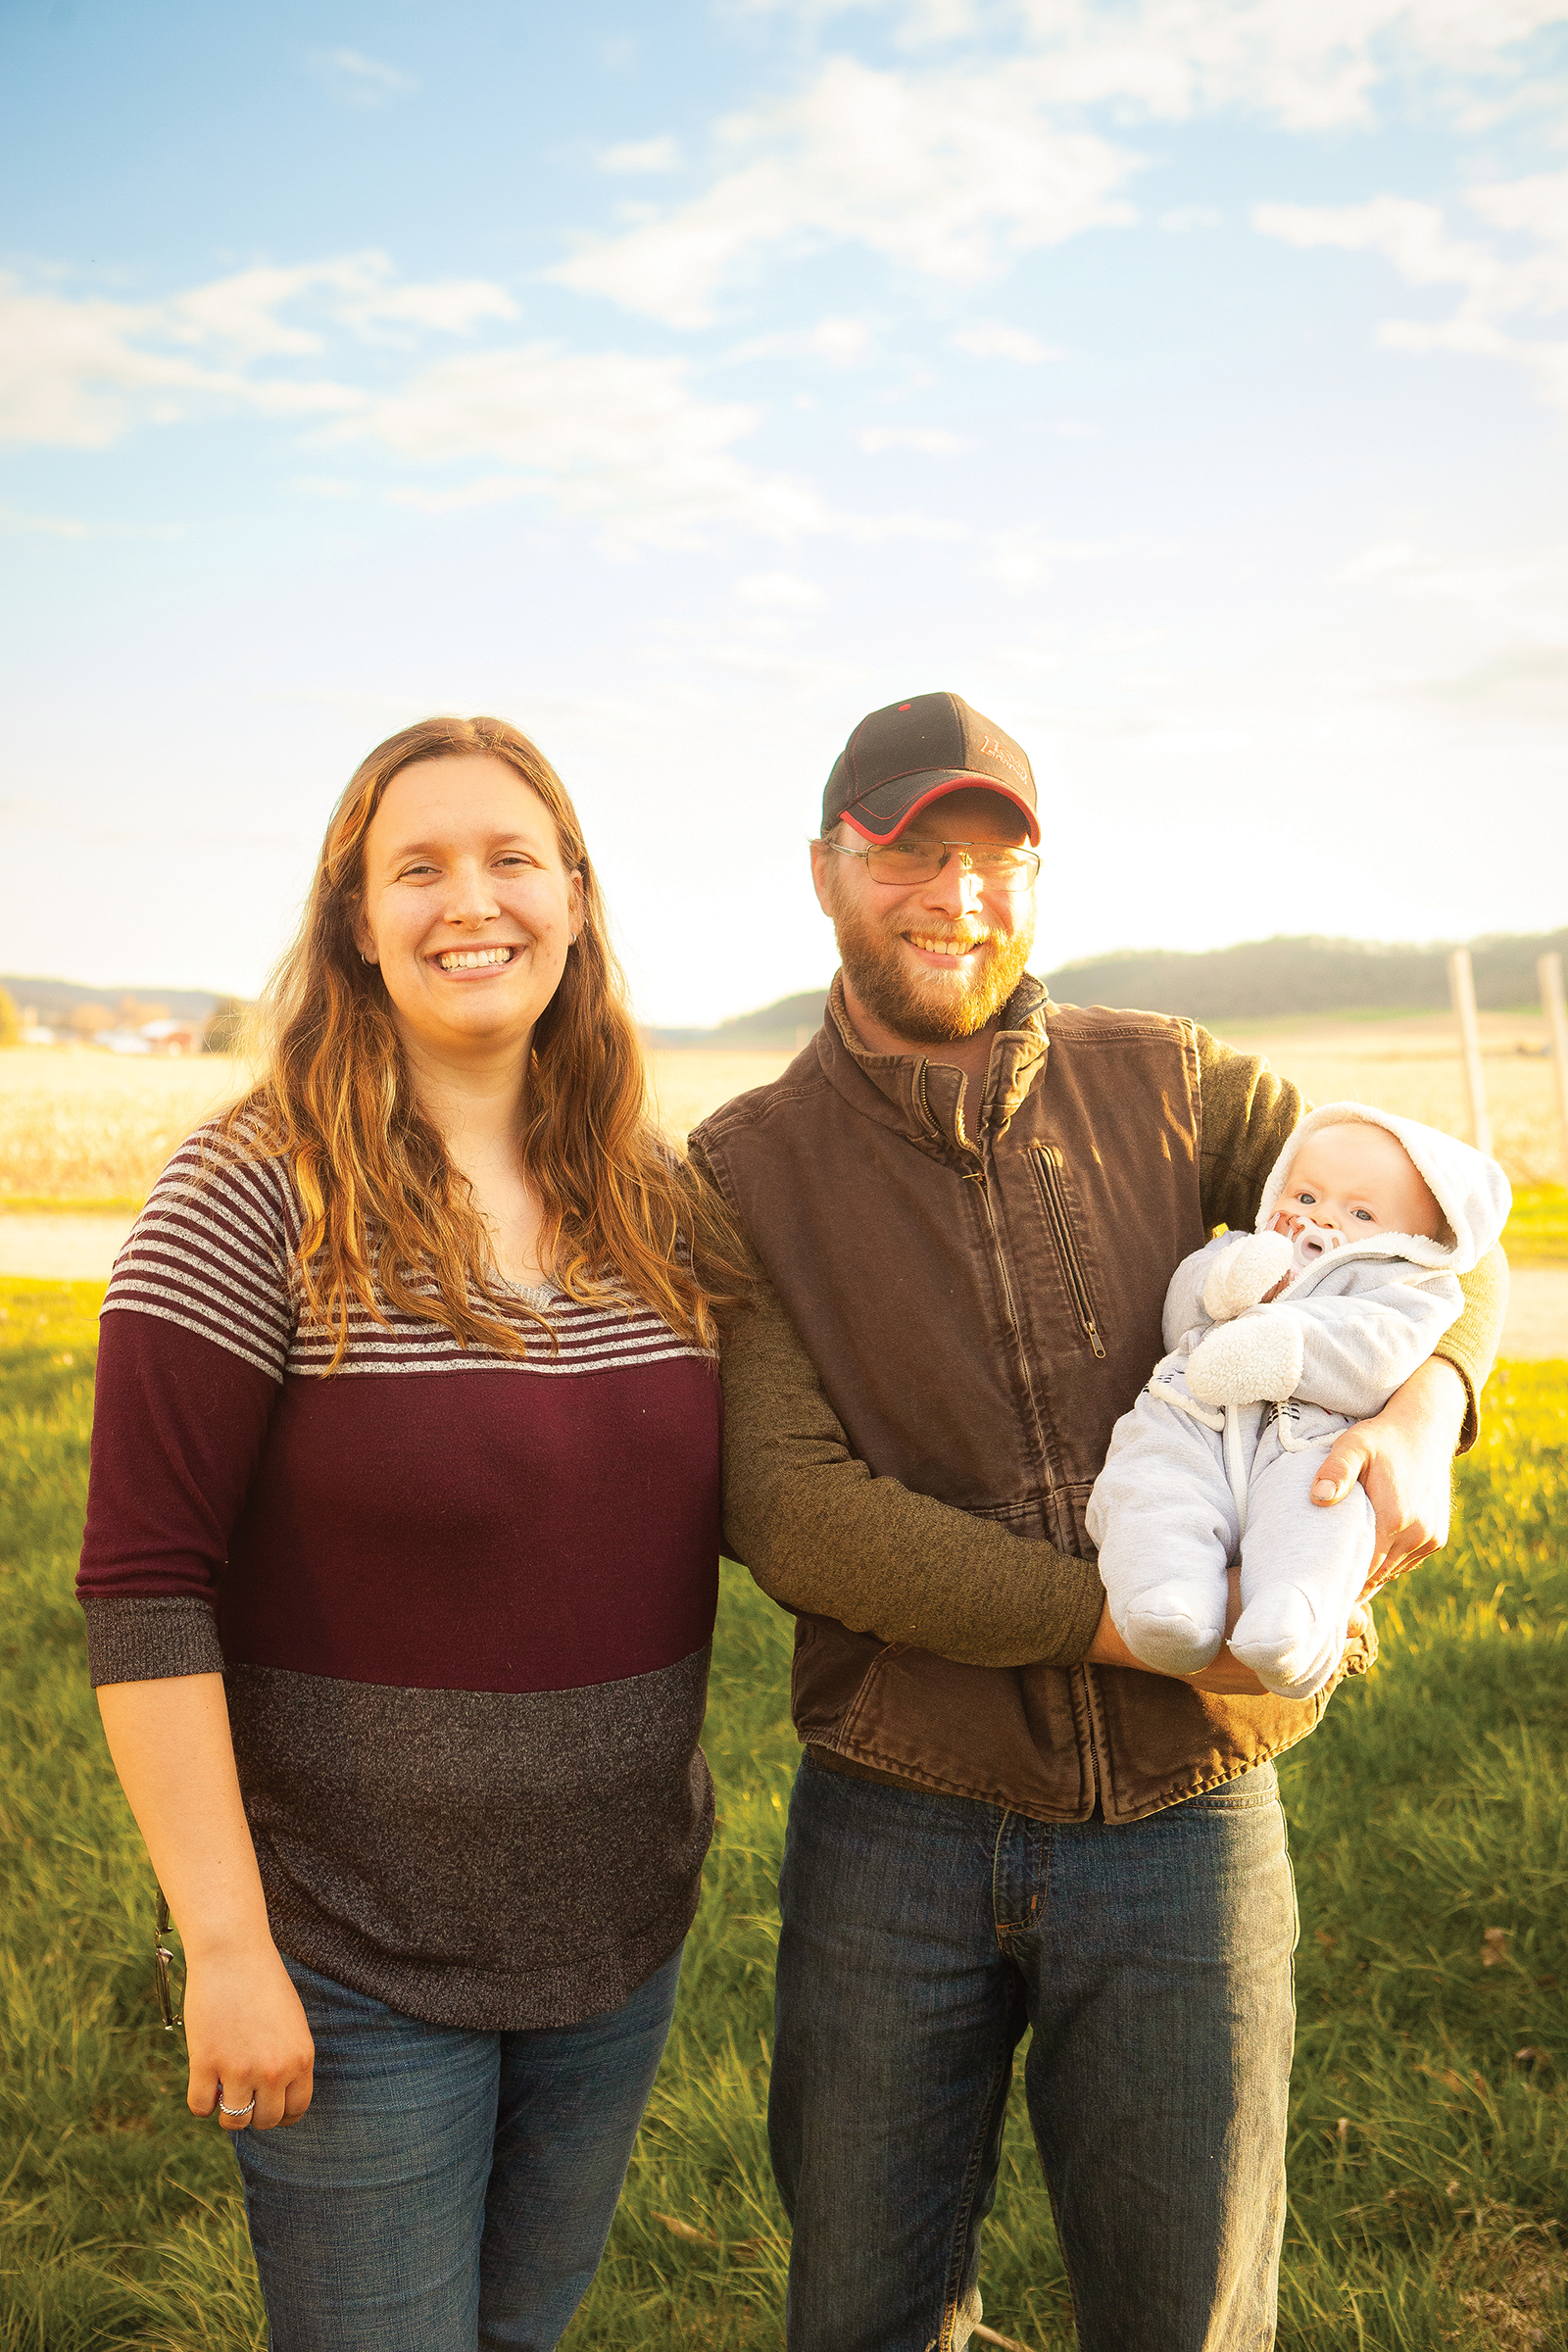 Andrea Rippley-Schlais serves as the 4-H Program Educator in Jackson and Trempealeau counties. Andrea and her husband, Nick, have one daughter, Grace.